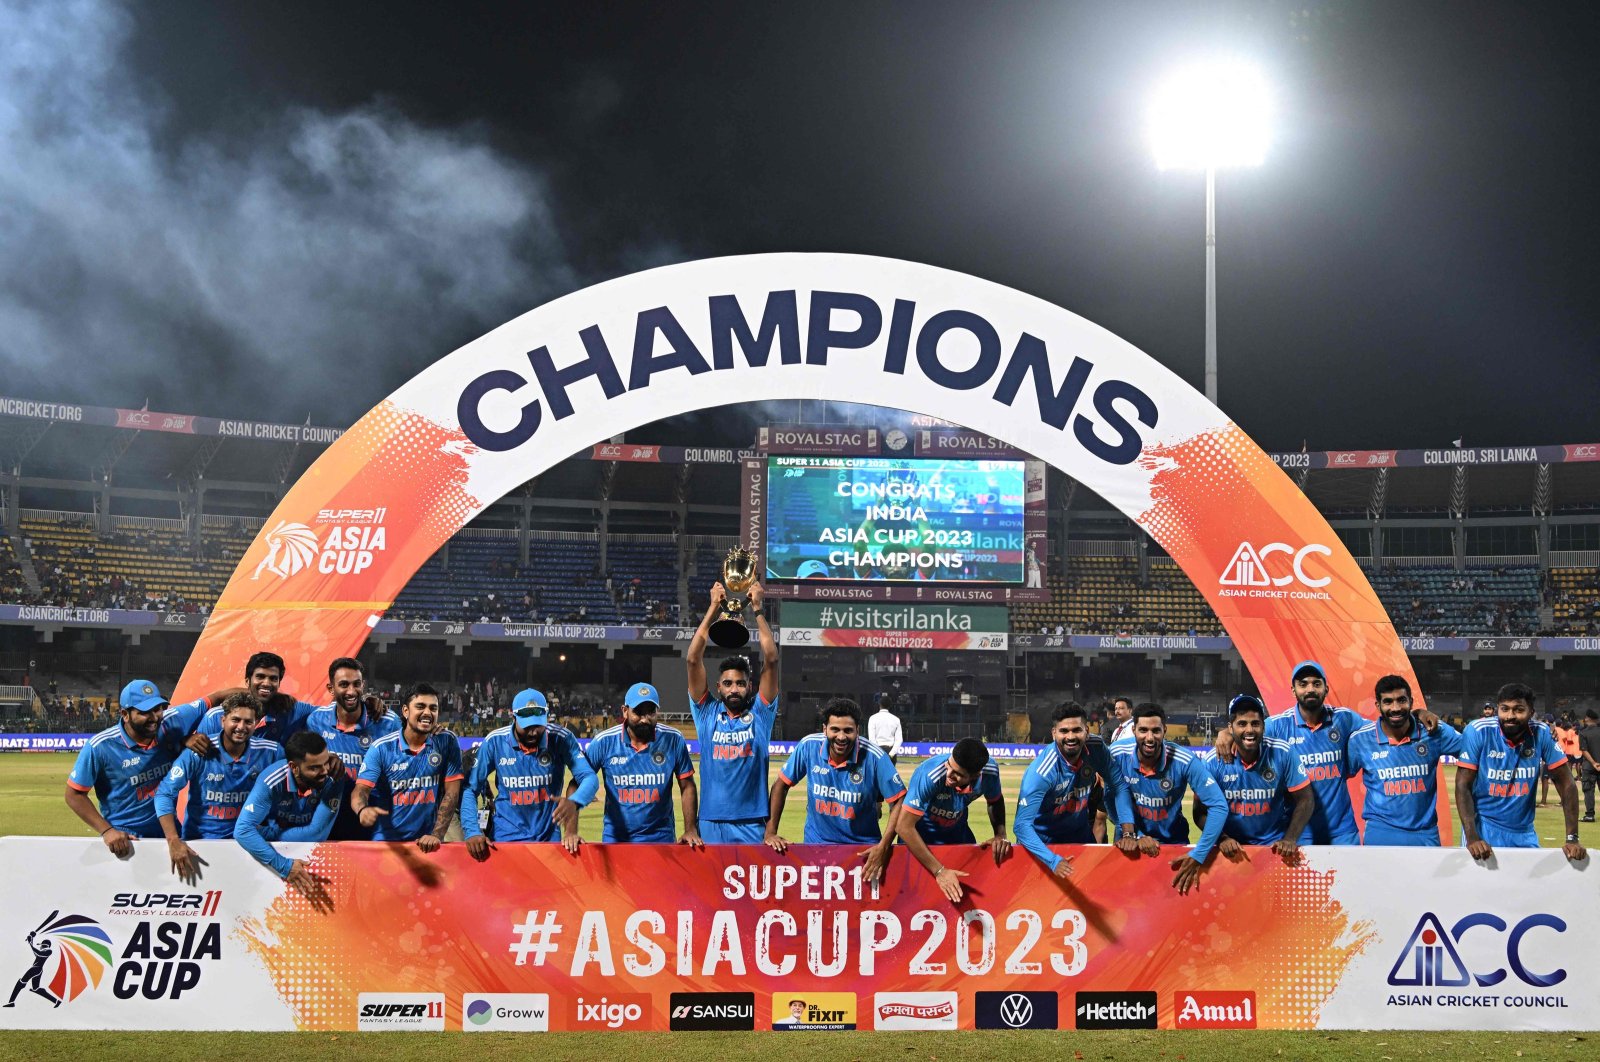 India players celebrate with the trophy after winning the Asia Cup 2023 in Colombo, Sri Lanka, Sept. 17, 2023. (AFP Photo)